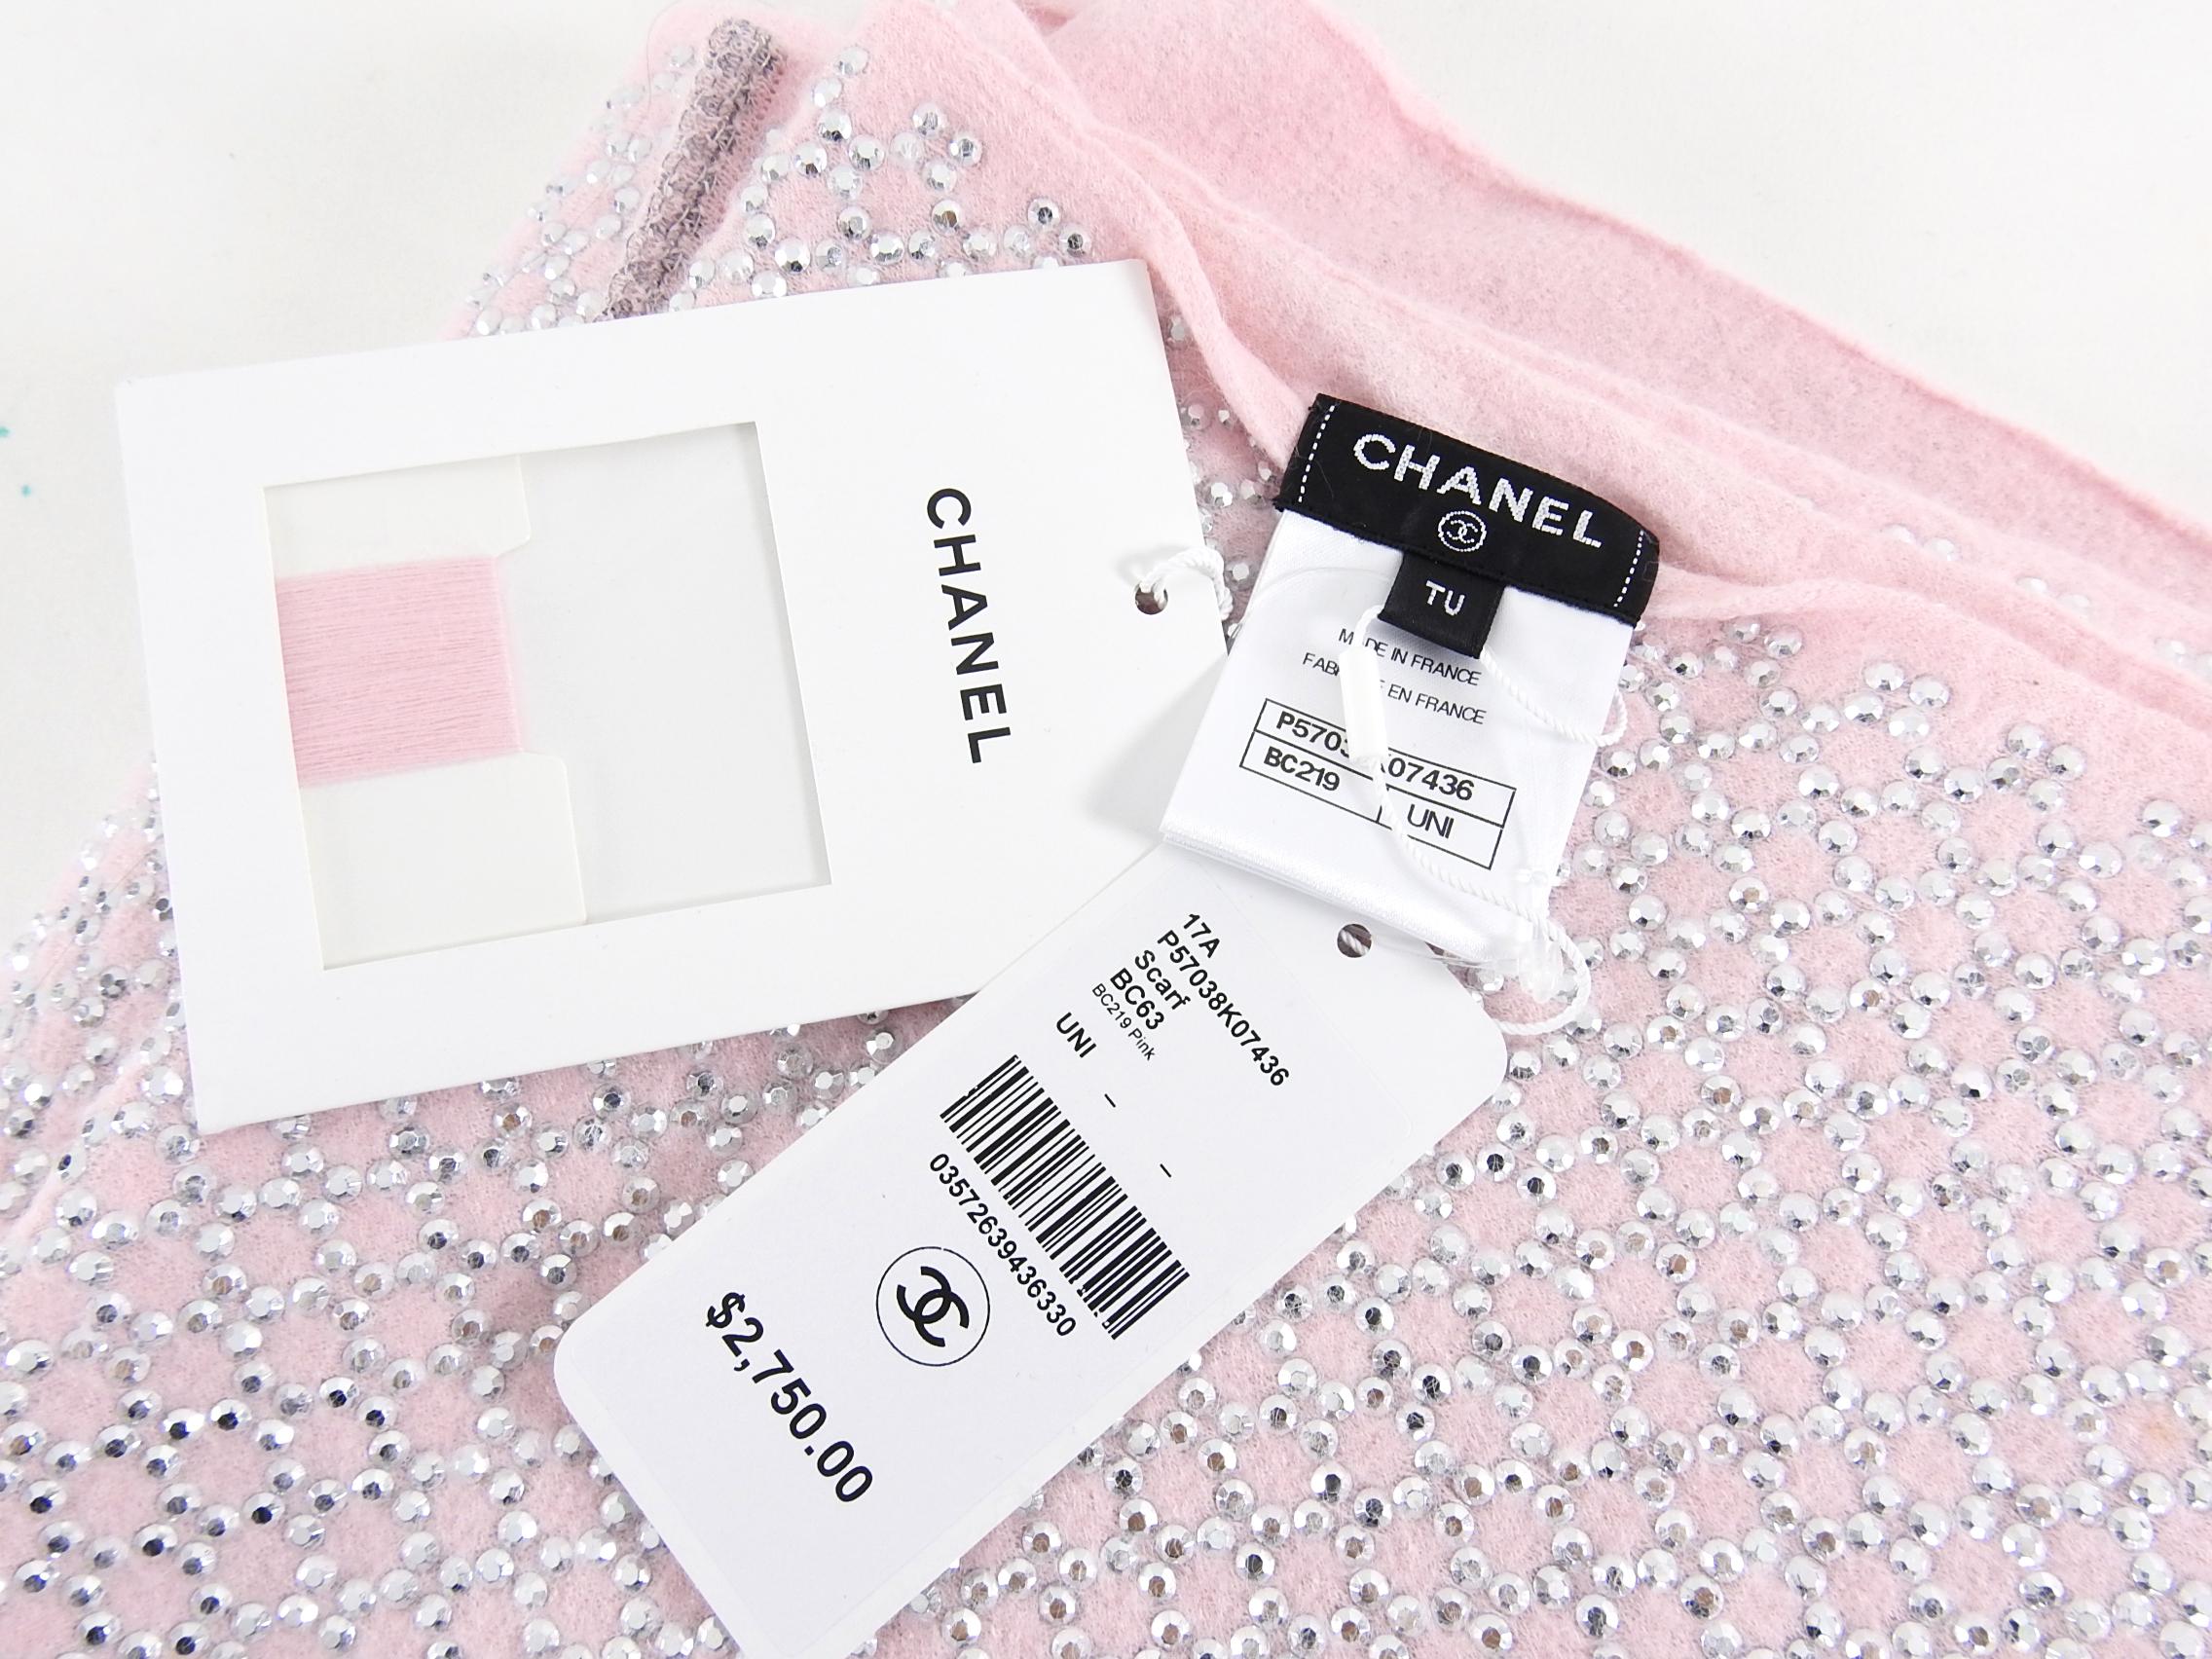 Chanel 17A Pink and Silver Strass Long Angora Scarf.  Brand new unworn with $2750 retail price tag attached.  Includes plastic bag and extra thread. Soft 70% angora and 30% silk extra long scarf measuring 98” x 8”.  